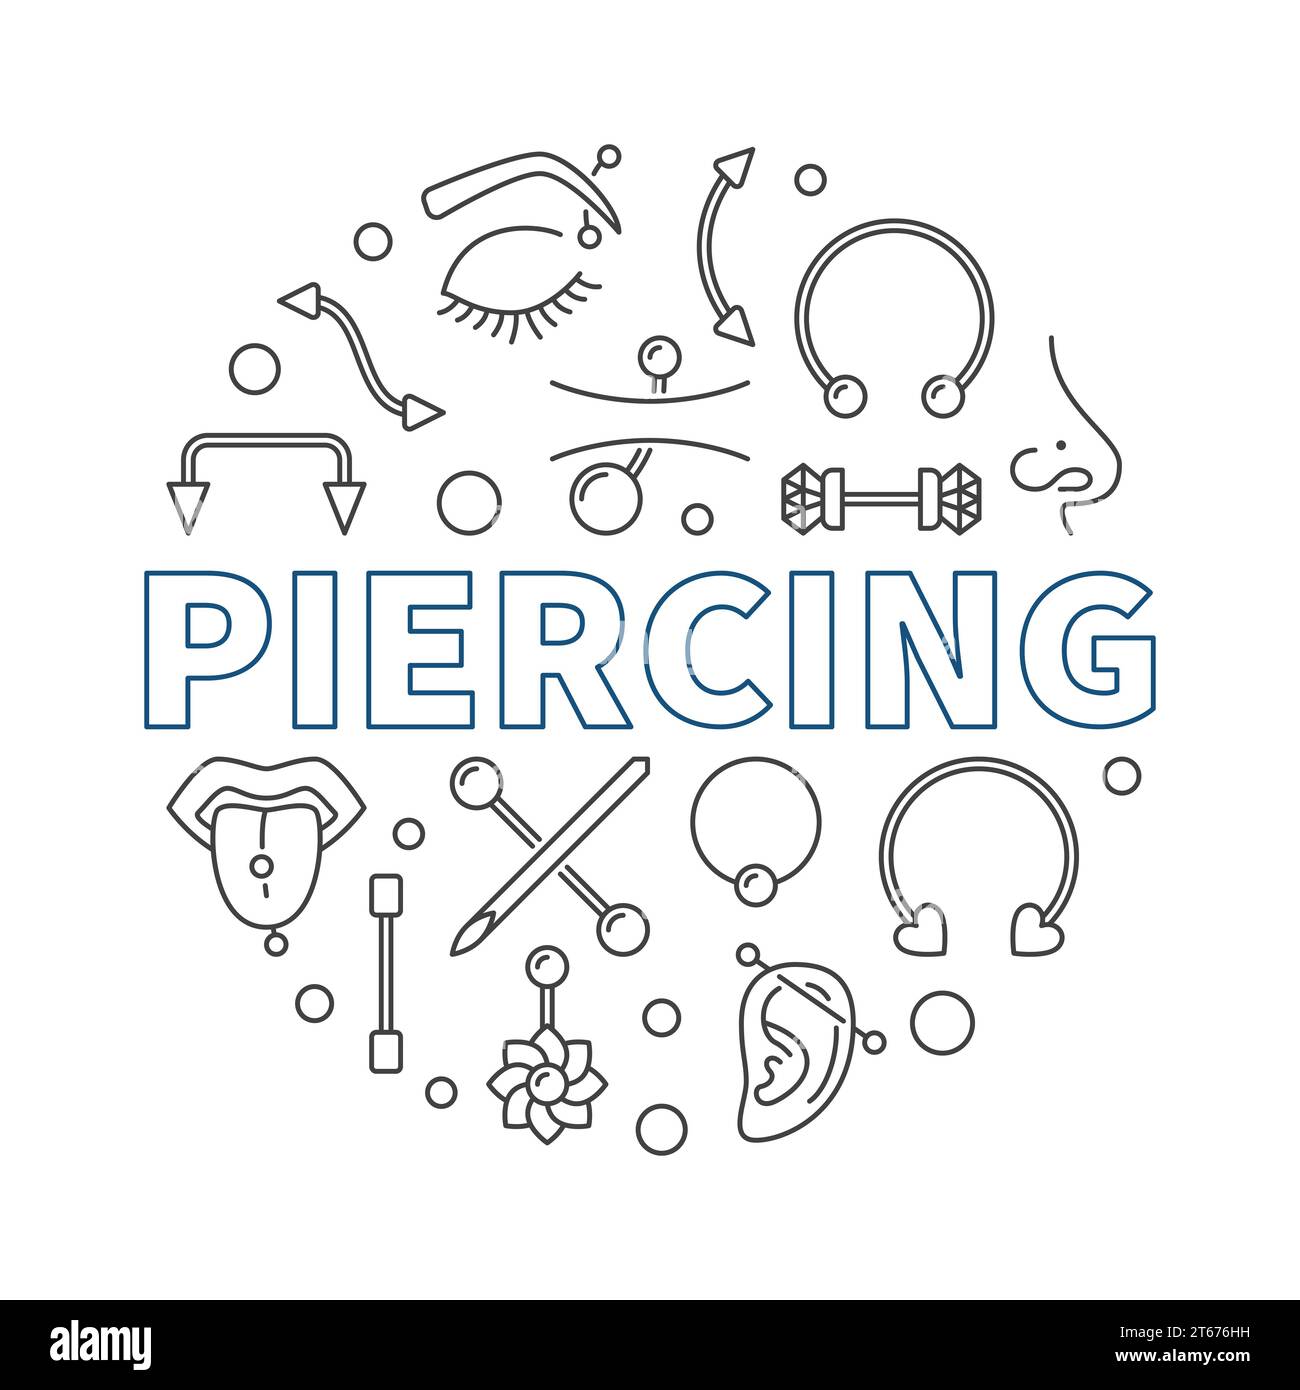 Piercing vector round minimal illustration made with outline piercings concept icons Stock Vector